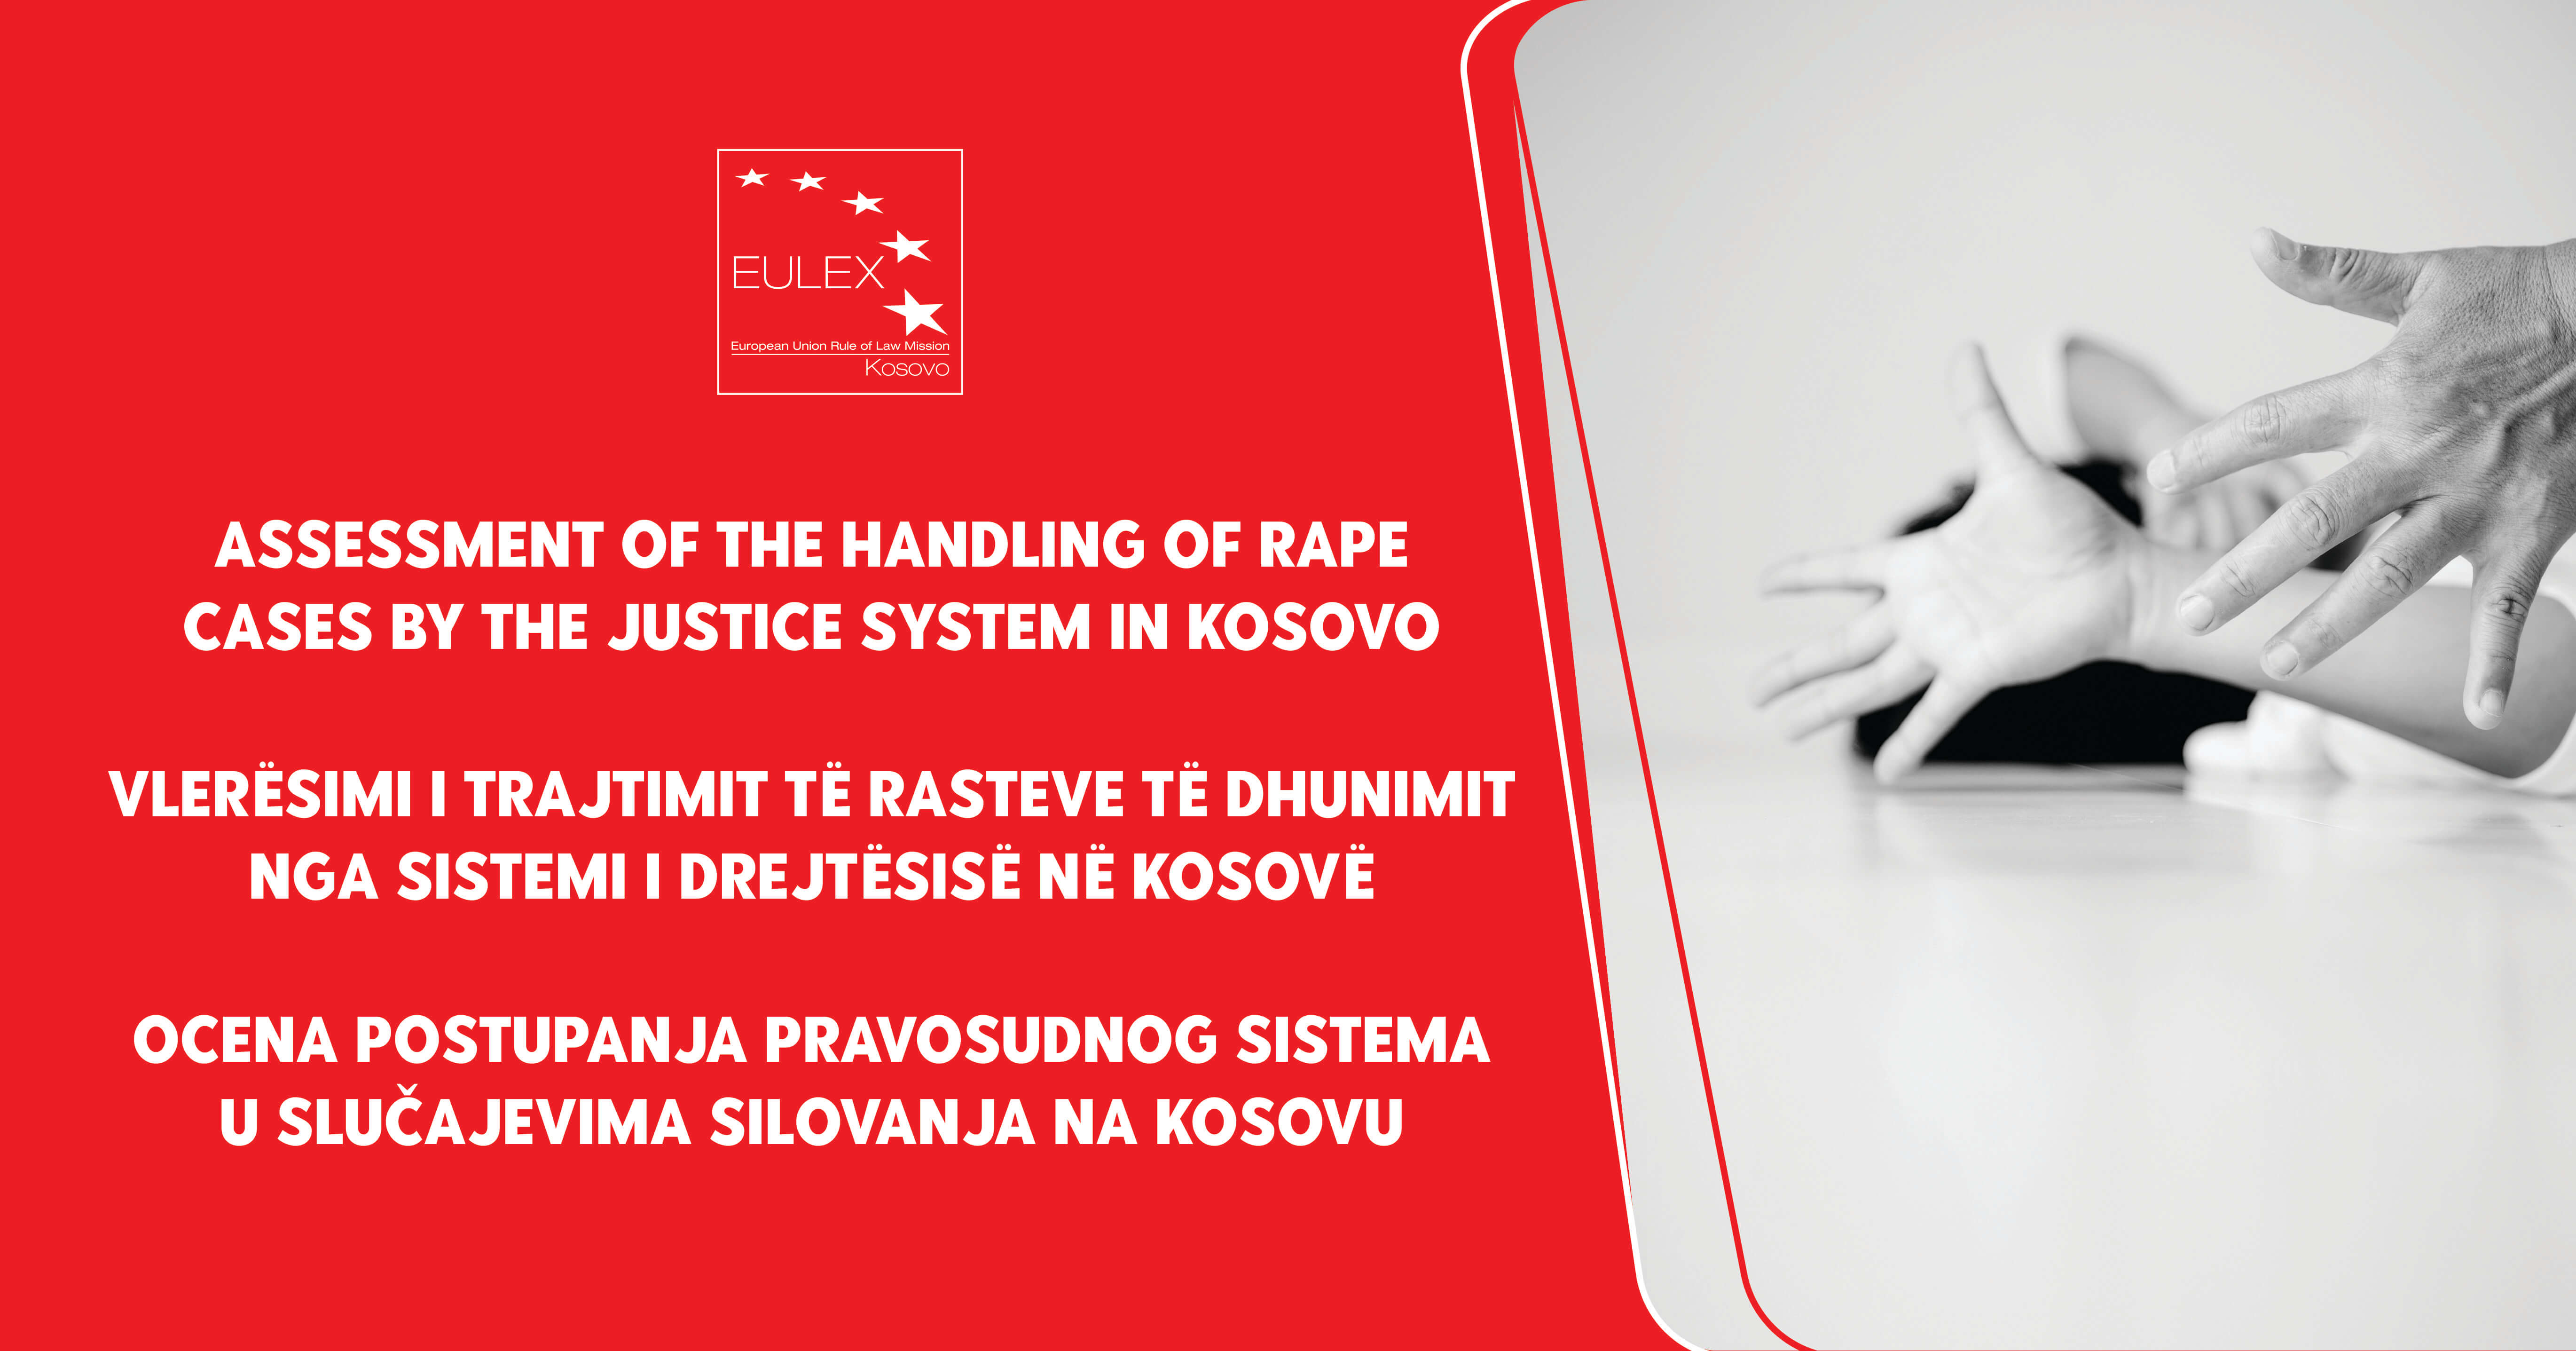 Presentation of EULEX’s Monitoring Report : “Assessment of the Handling of Rape Cases by the Justice System in Kosovo”